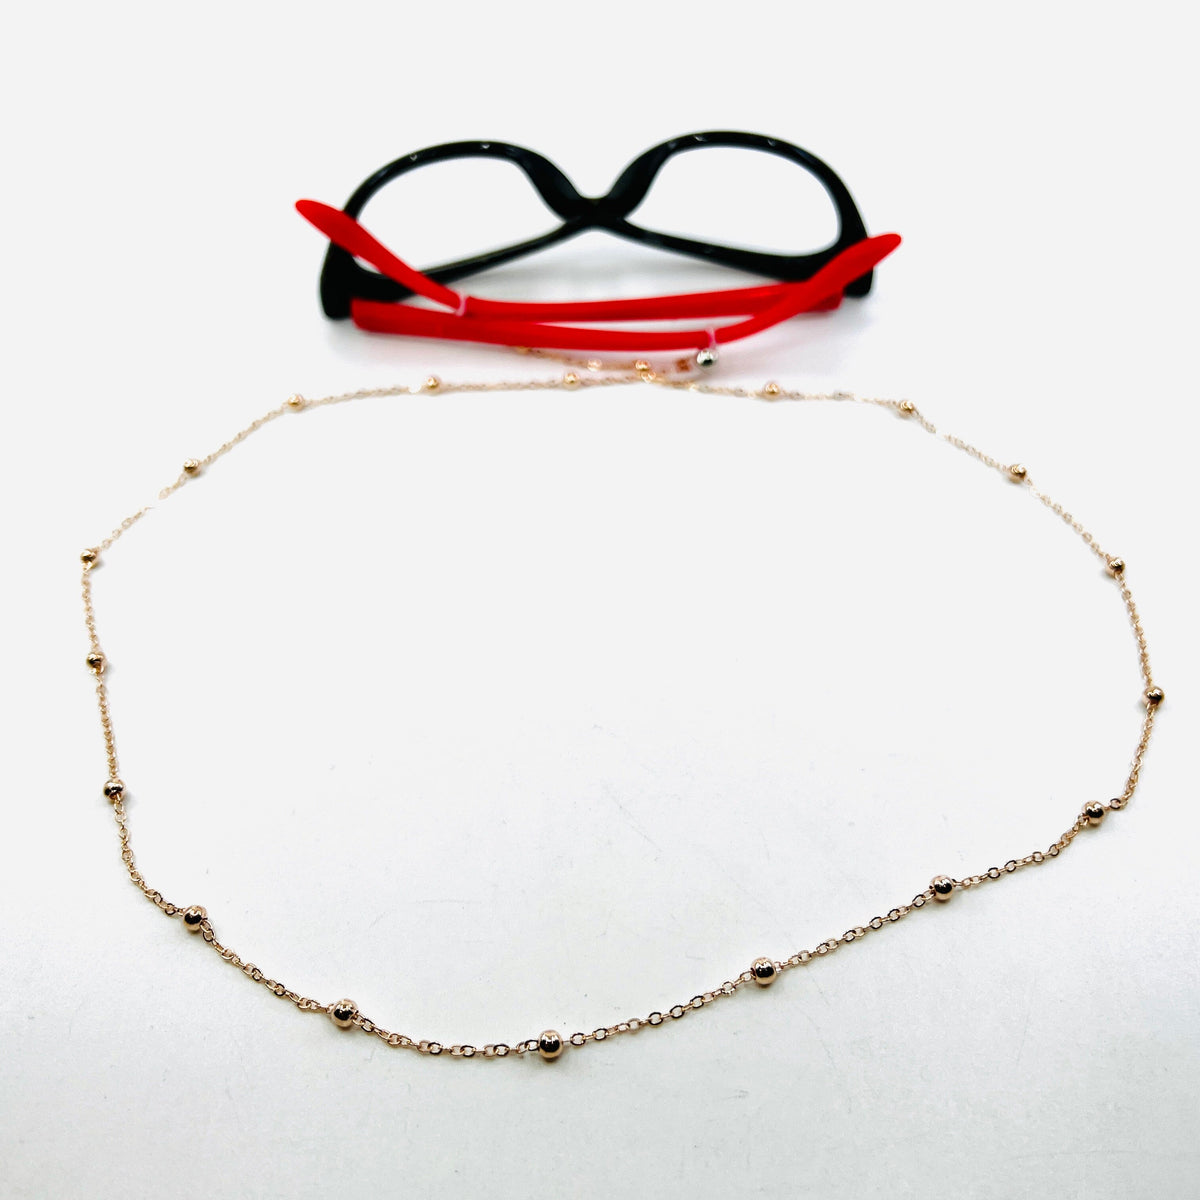 Clearance Item 299 Glasses Chain Jewelry - 